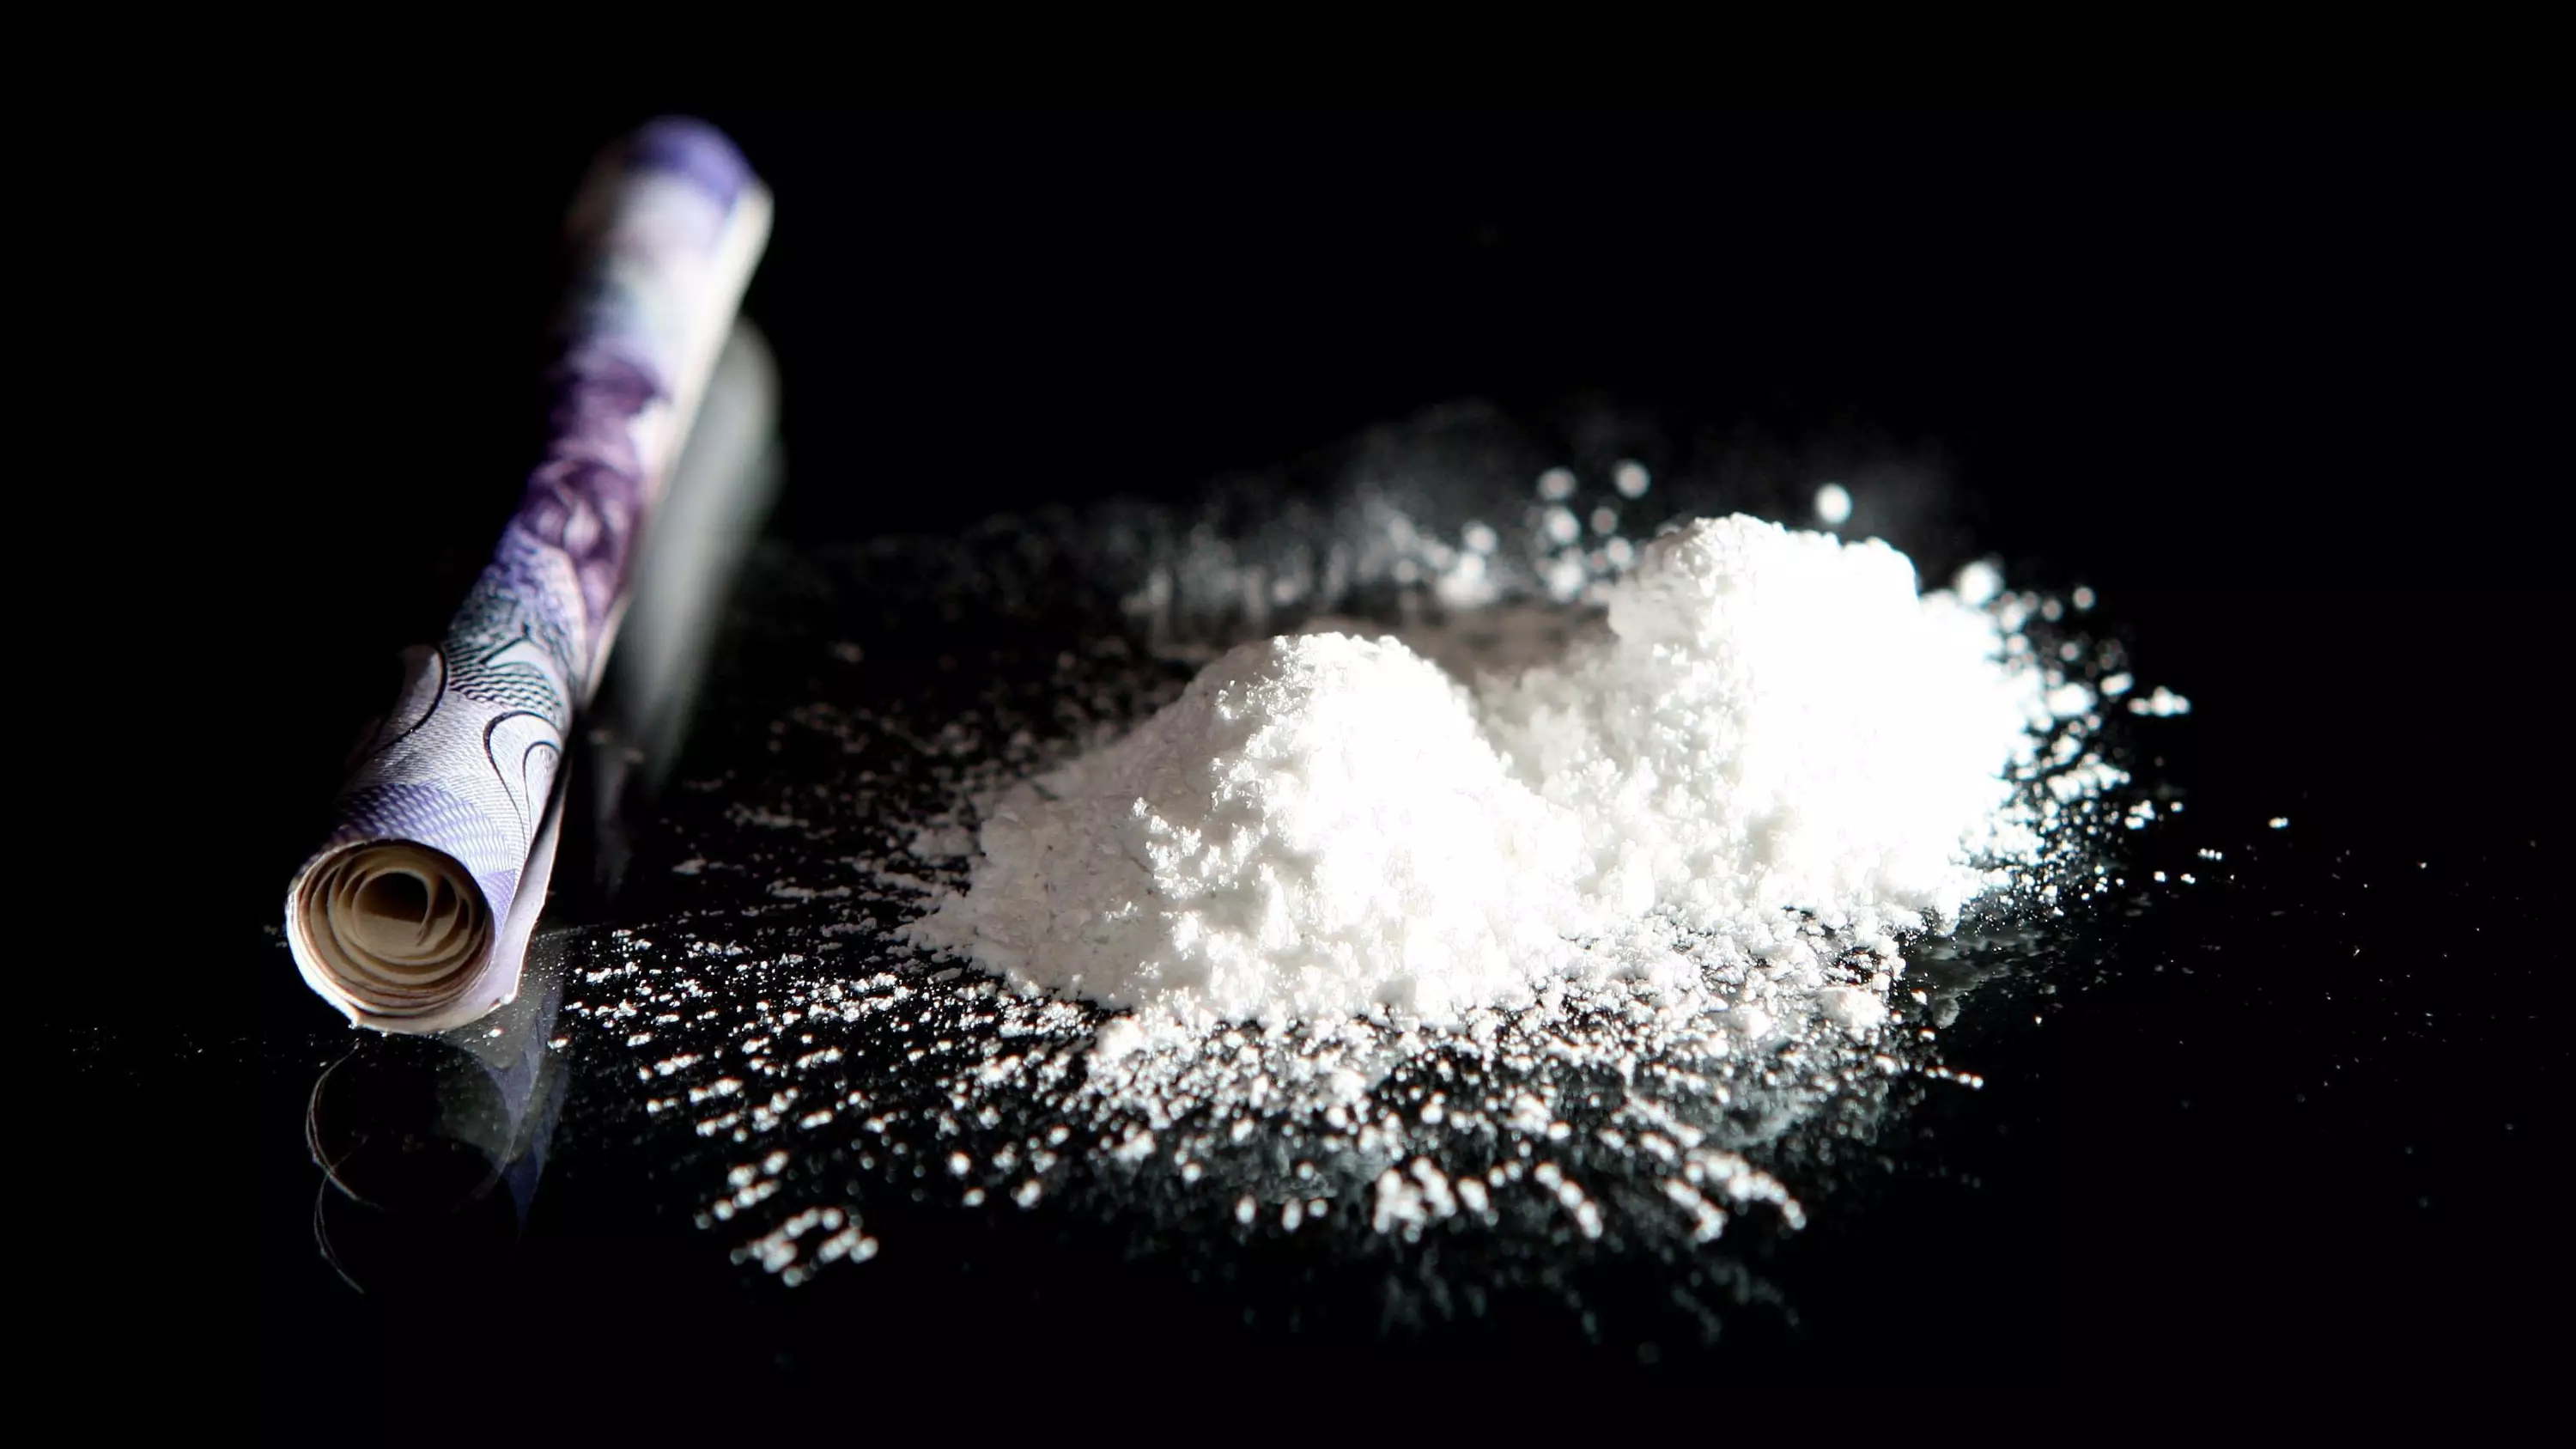 Victoria Overtakes New South Wales To Become The Cocaine Capital Of Australia